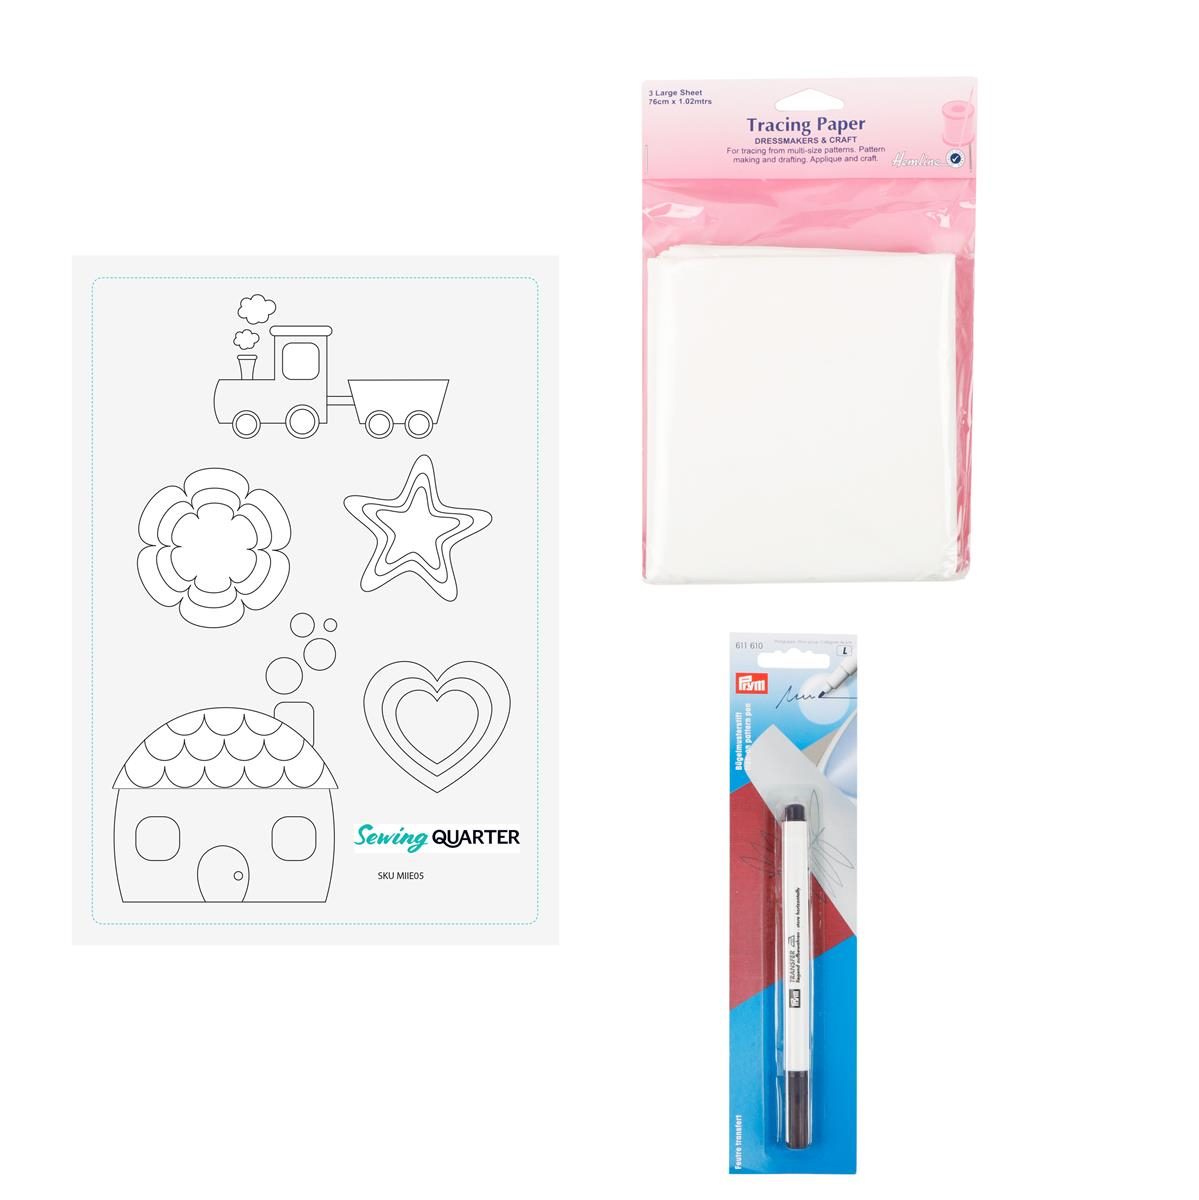 Baby Embroidery Patterns Ba Embroidery Pattern Kit Template Tracing Paper And Iron Patter Pen